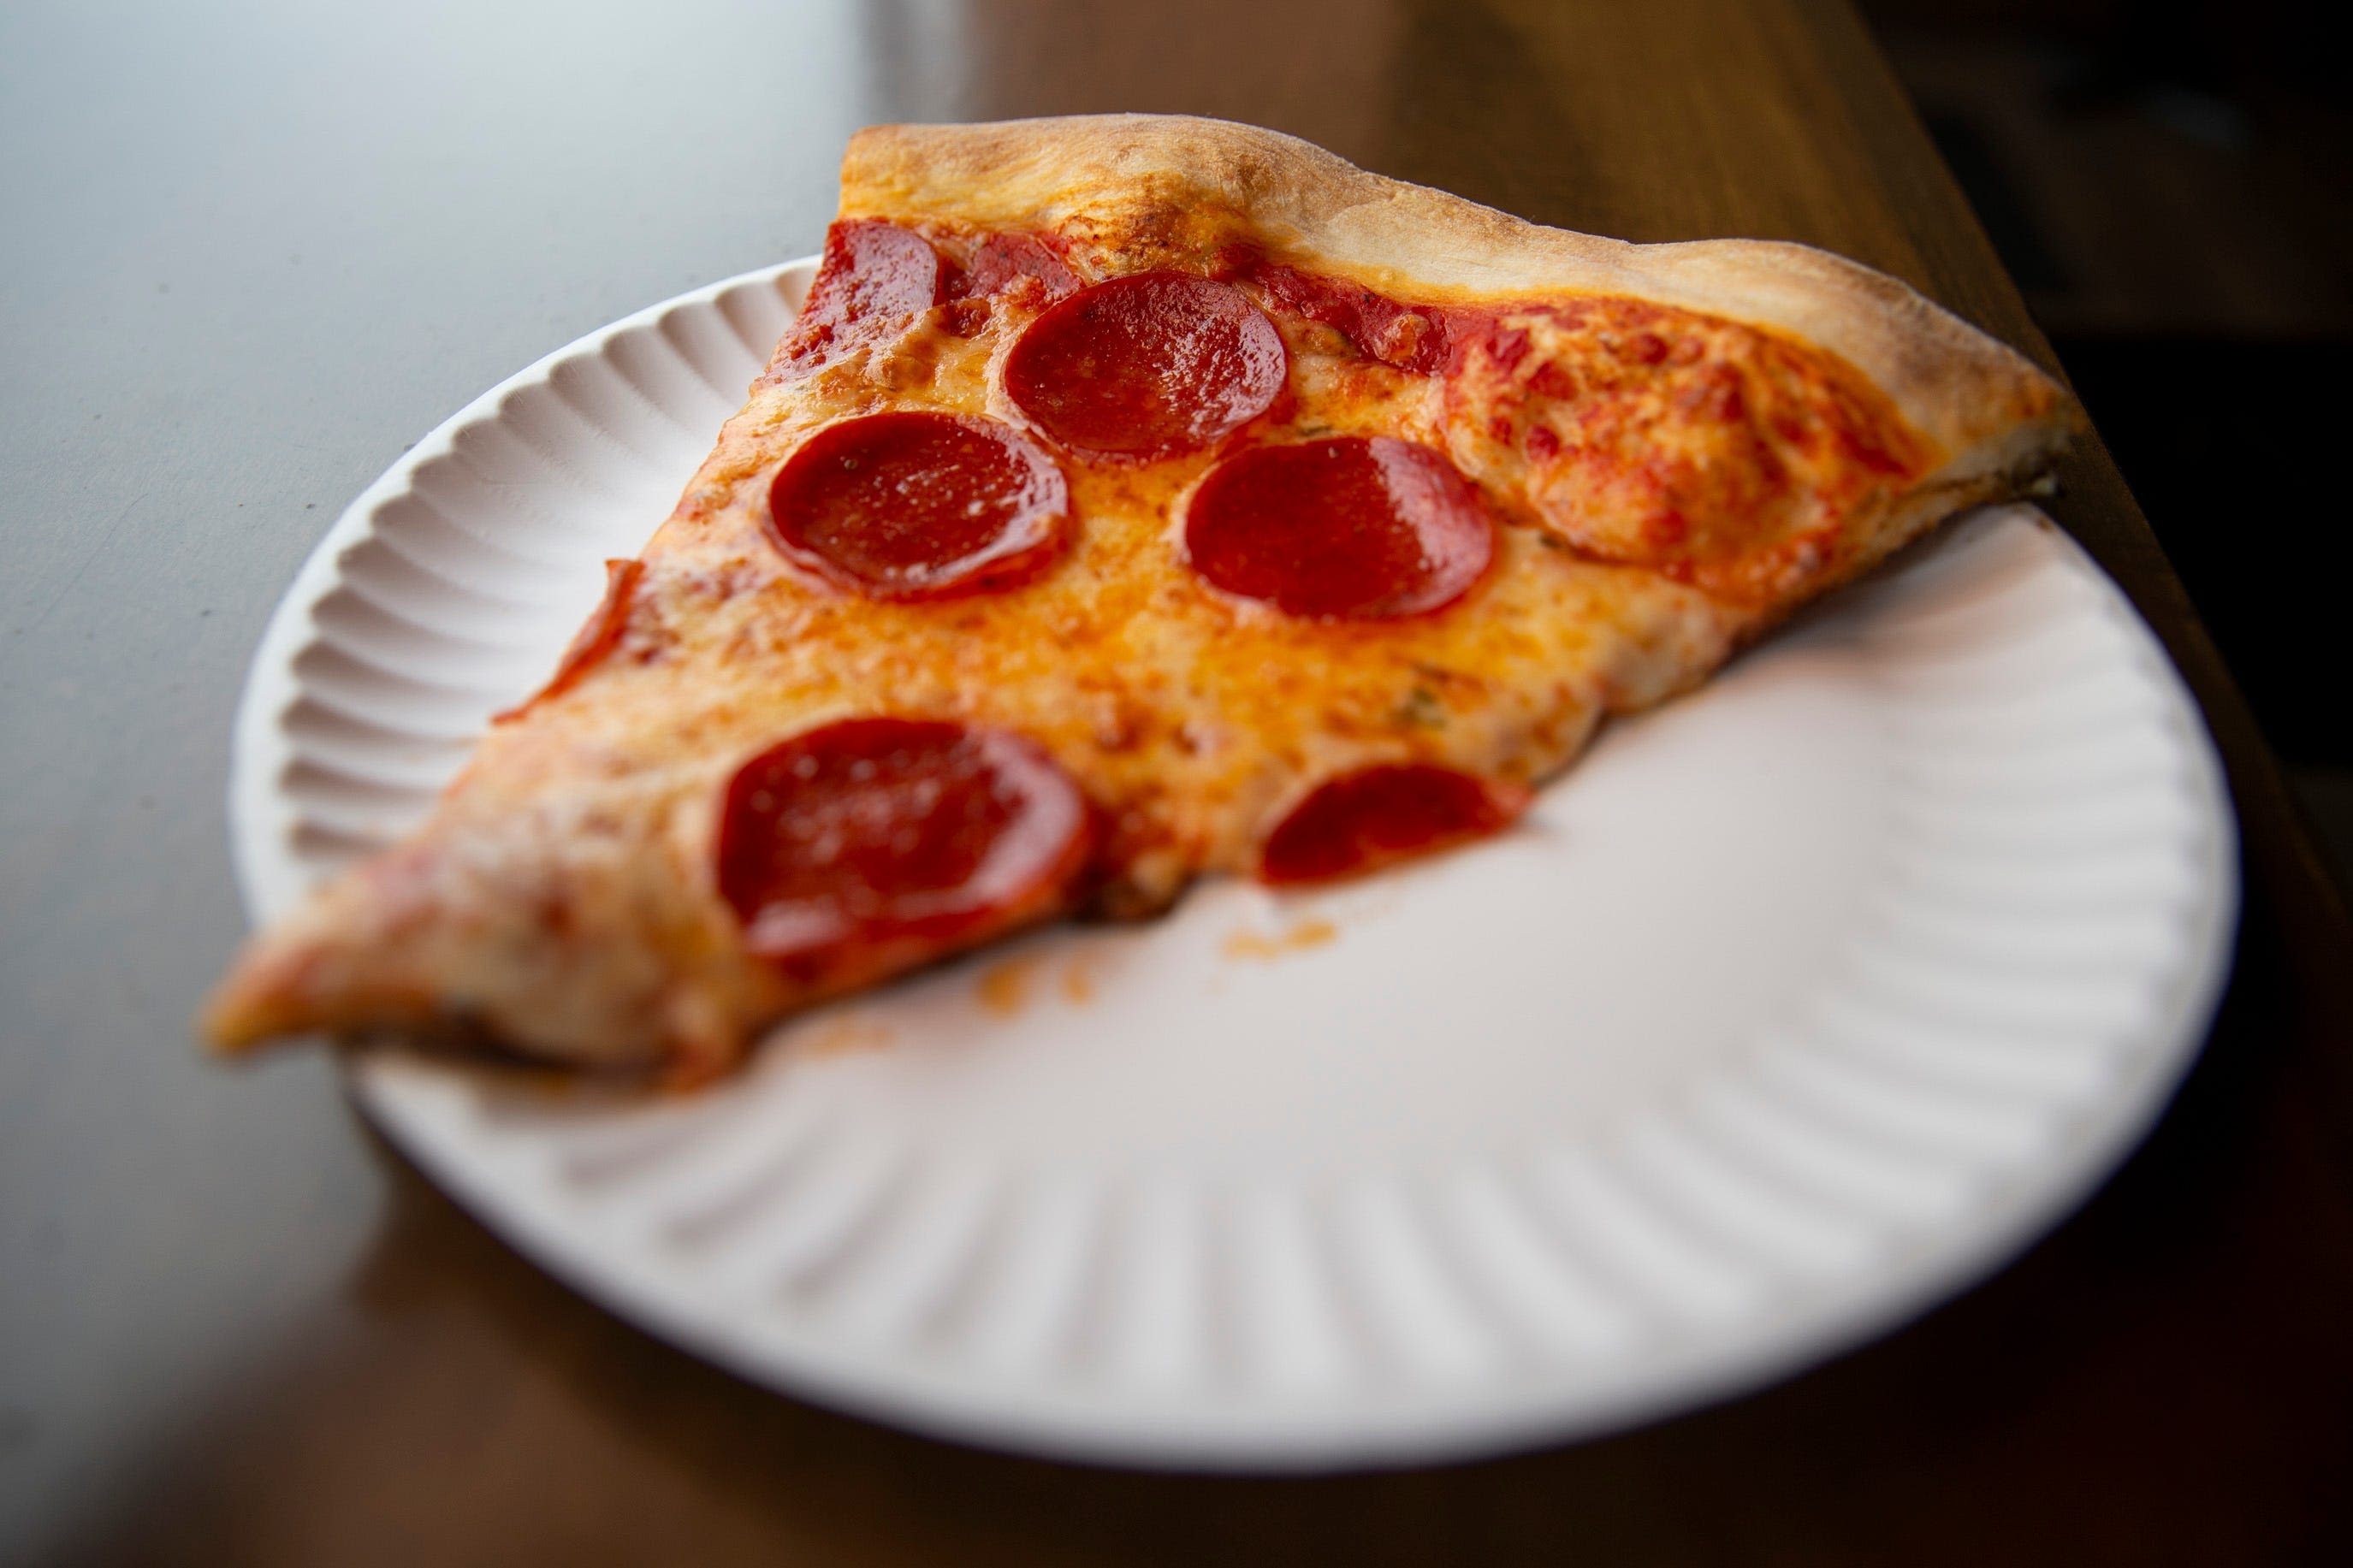 Walmart is opening pizza restaurants in four states. Here's what you need to know.